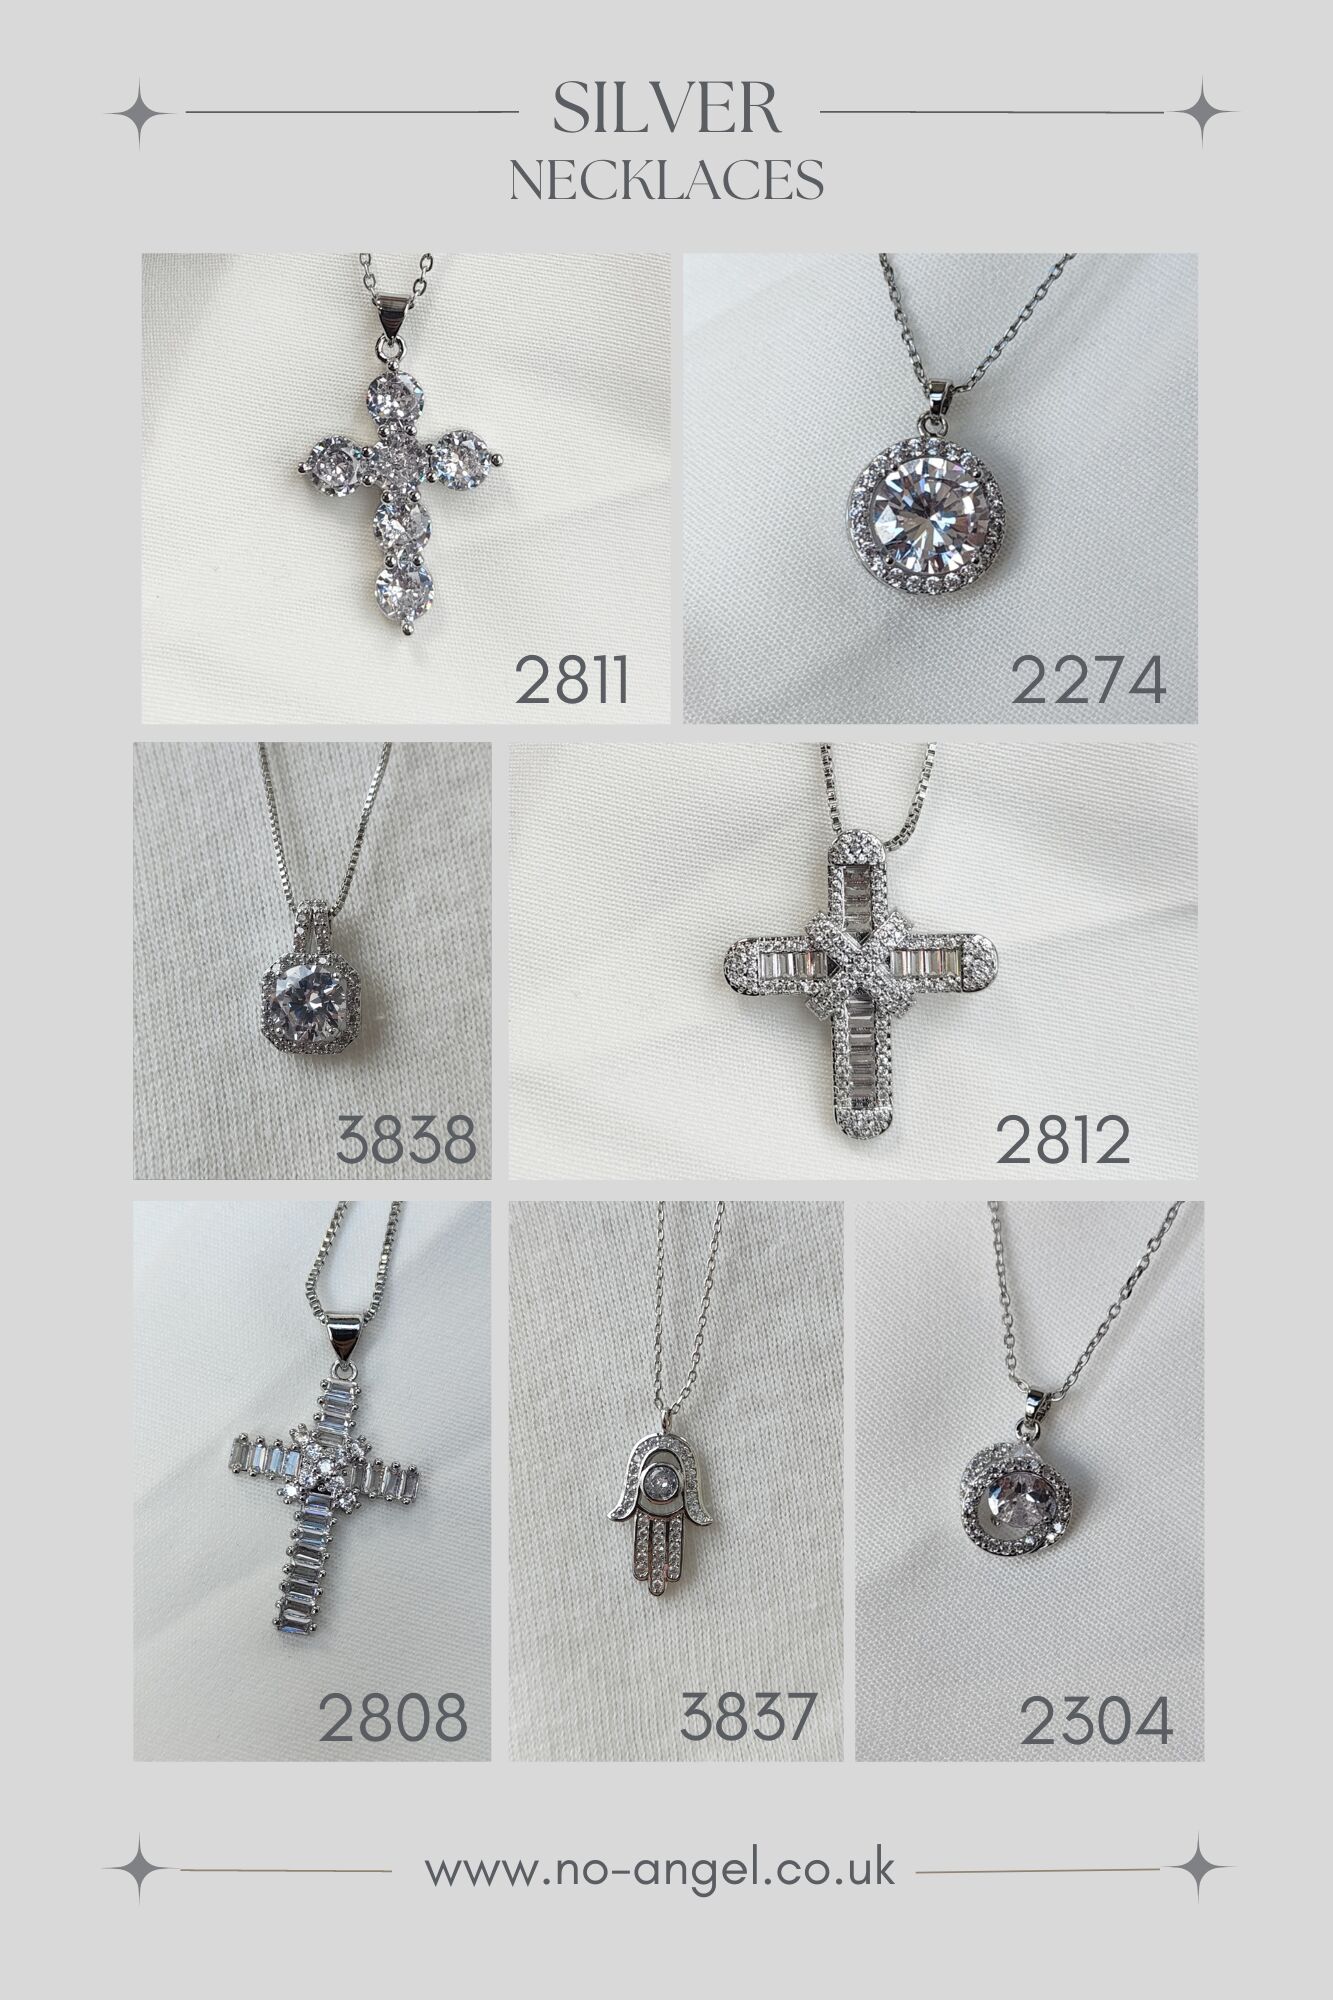 4 e SIEVERE ey NECKLACES 4 www.no-angel.couk 4 